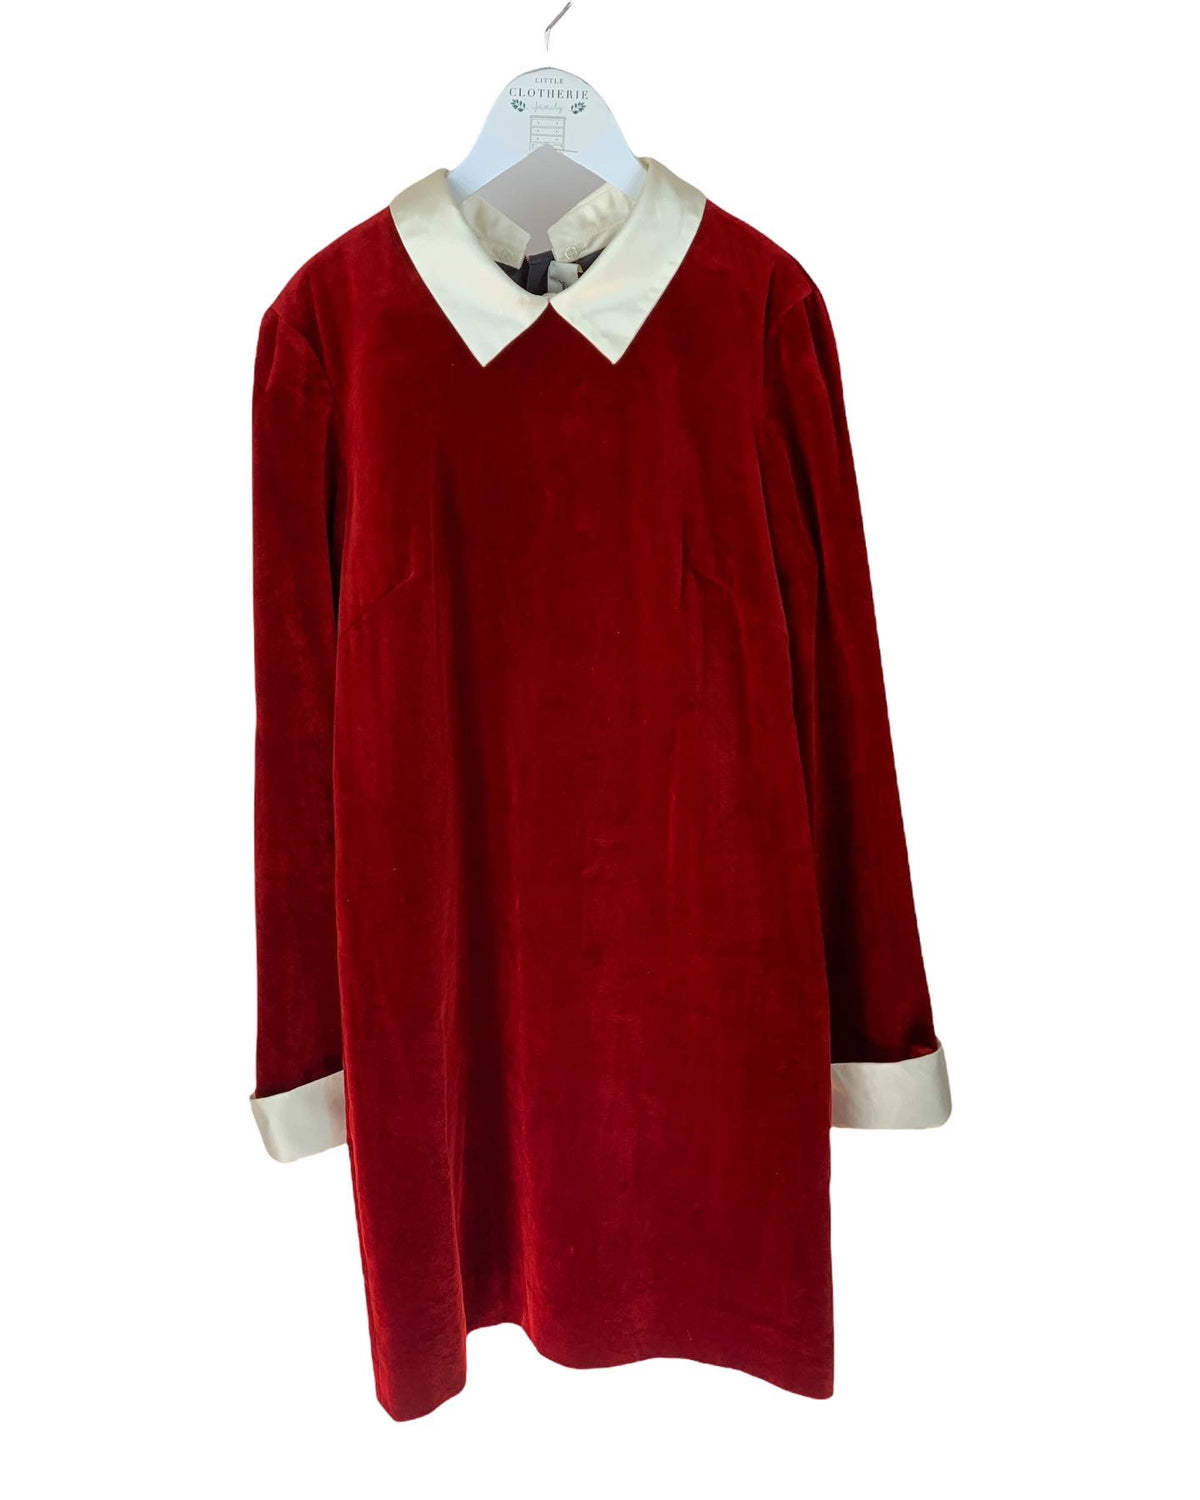 Robe Bonpoint Couture velours rouge taille XS / 16 ans